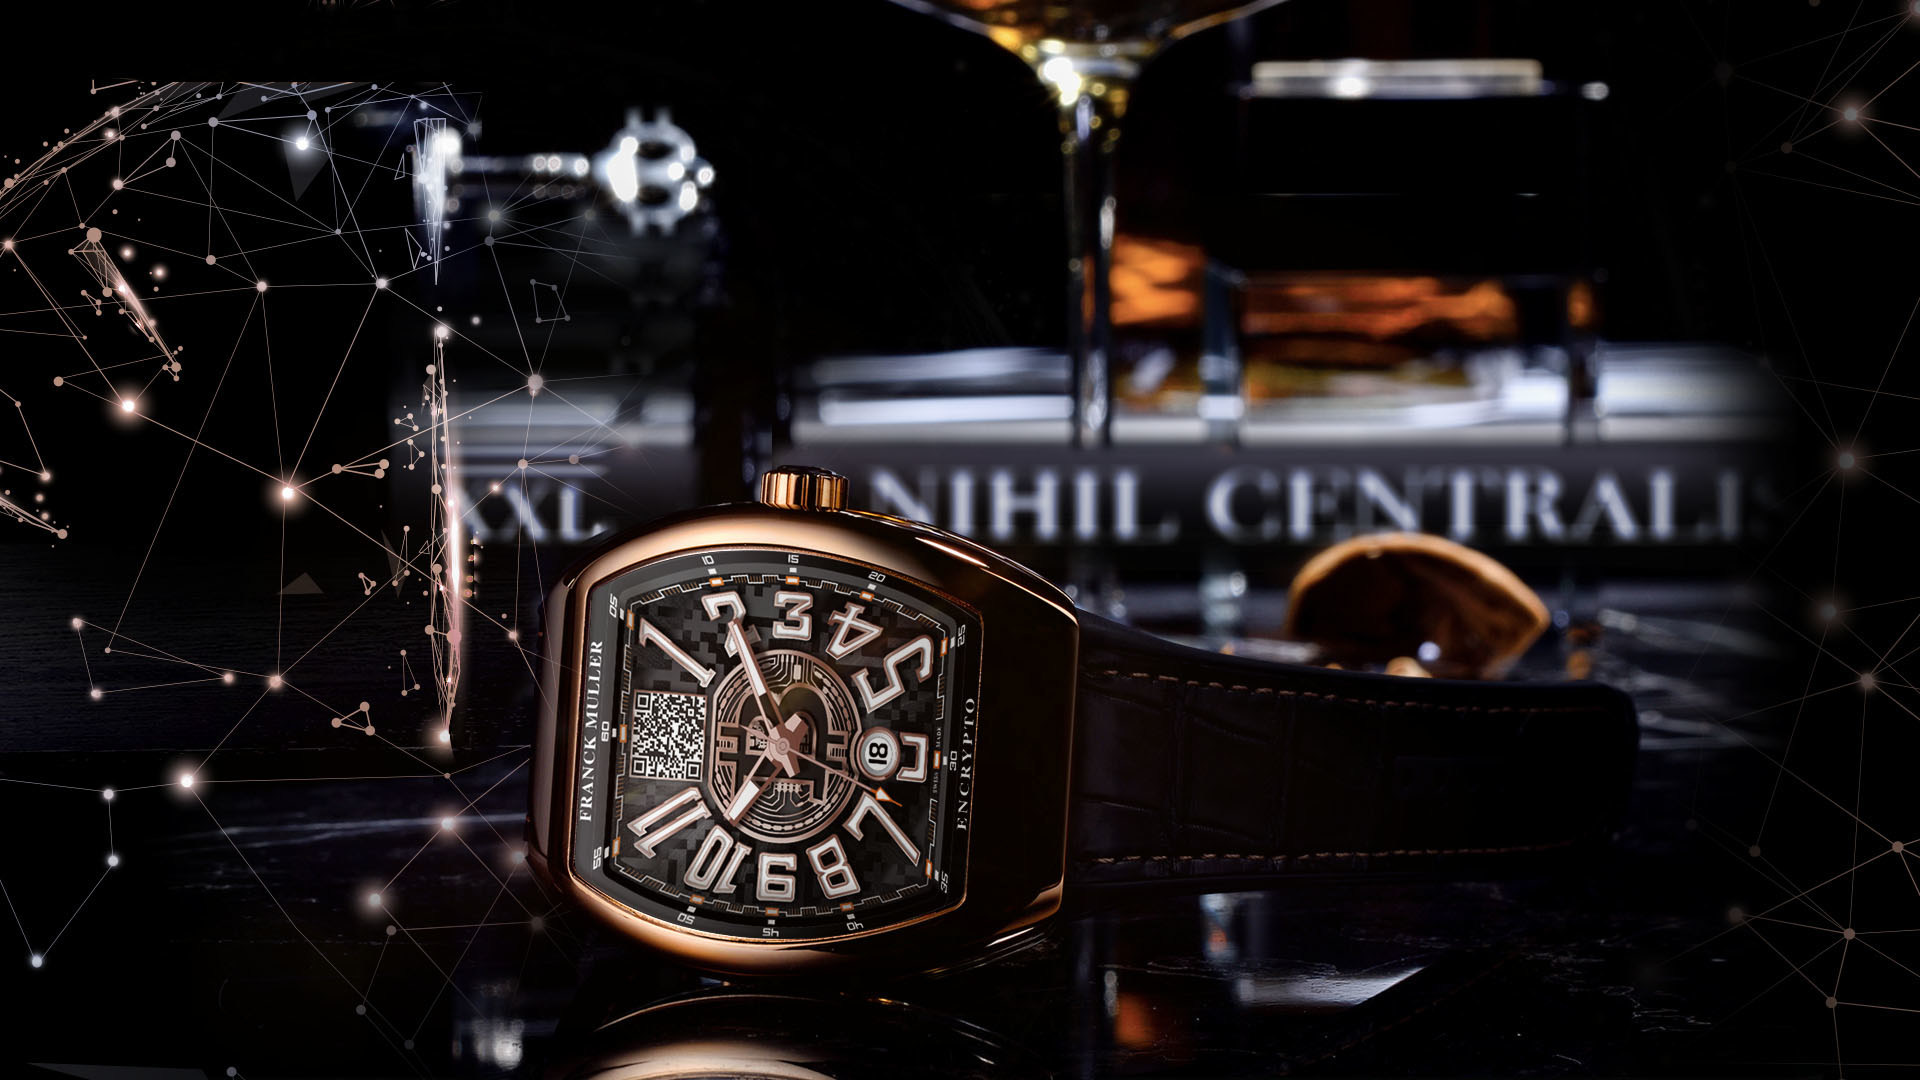 Franck Muller Famous Swiss Watchmaker Launches The World S First Functional Bitcoin Watch In Partnership With Regal Assets